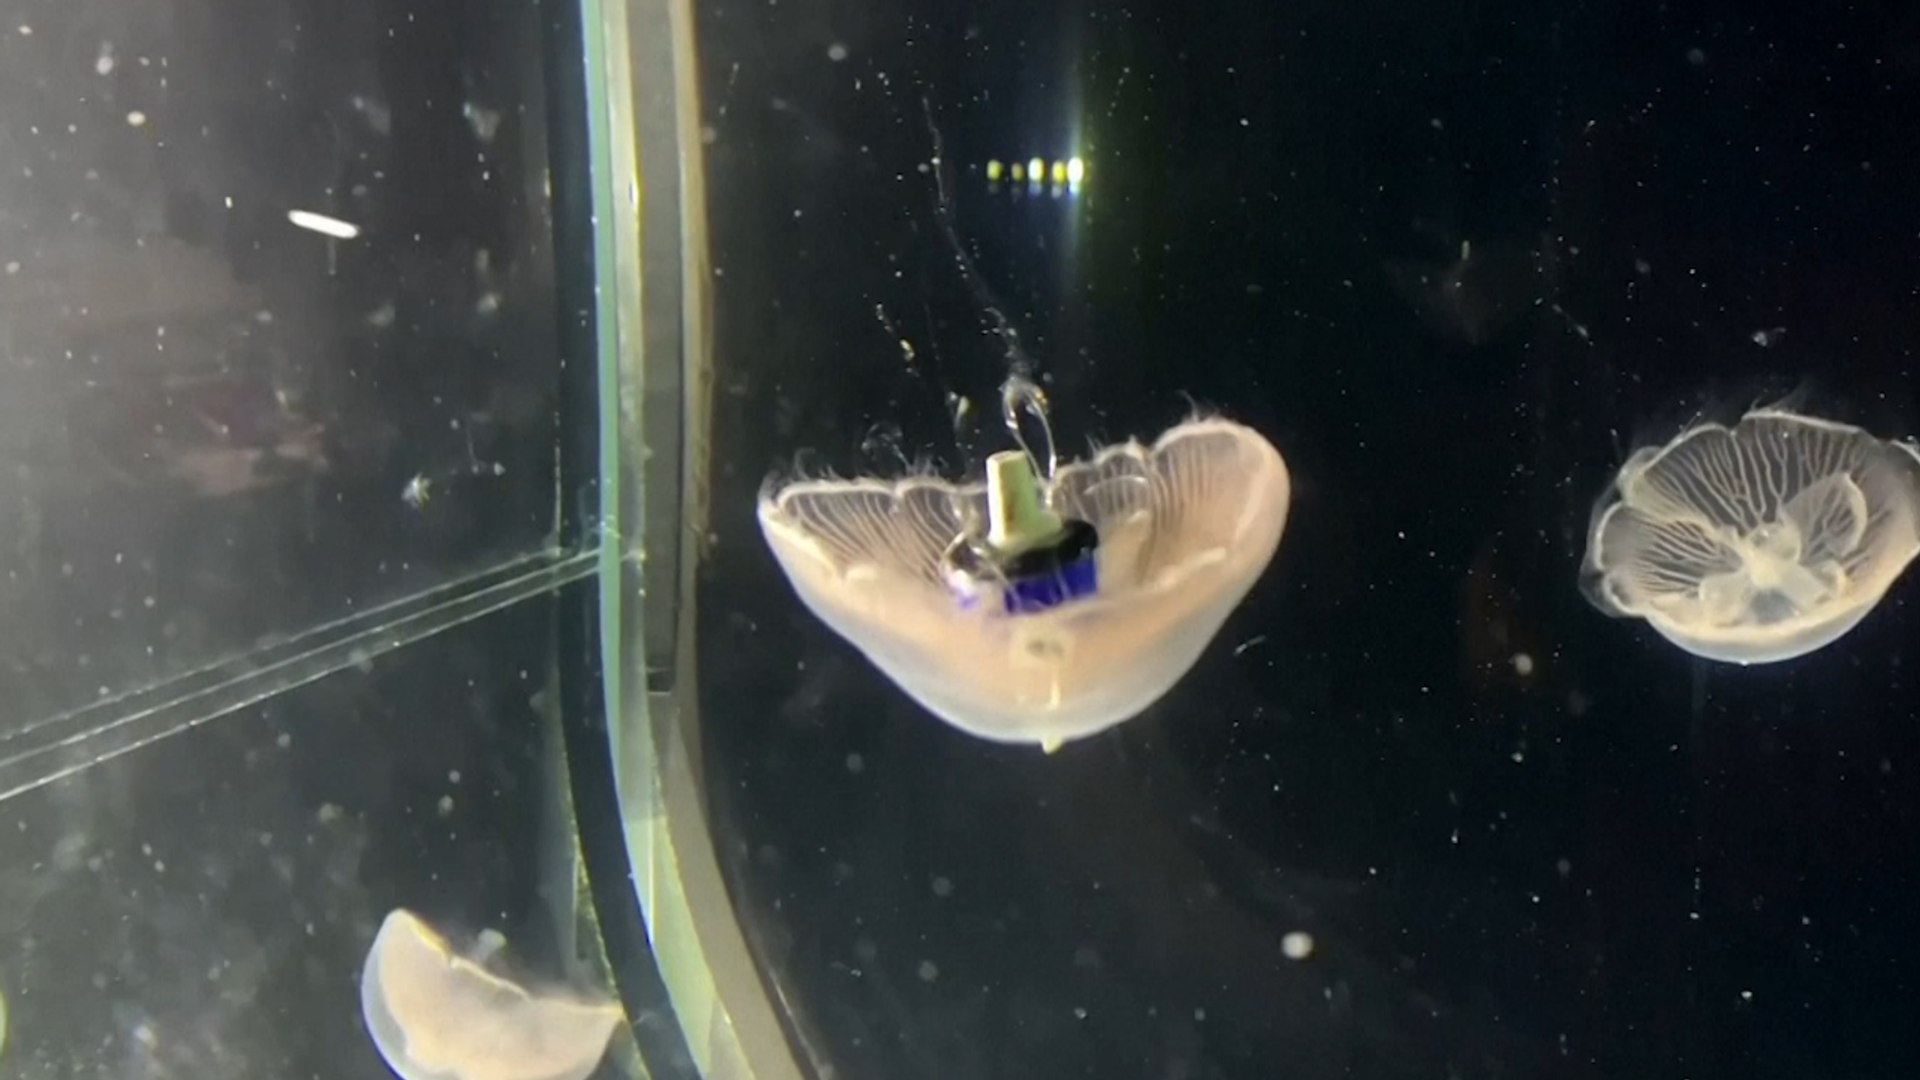 ‘Bionic Jellyfish’ Are Being Created By Researchers